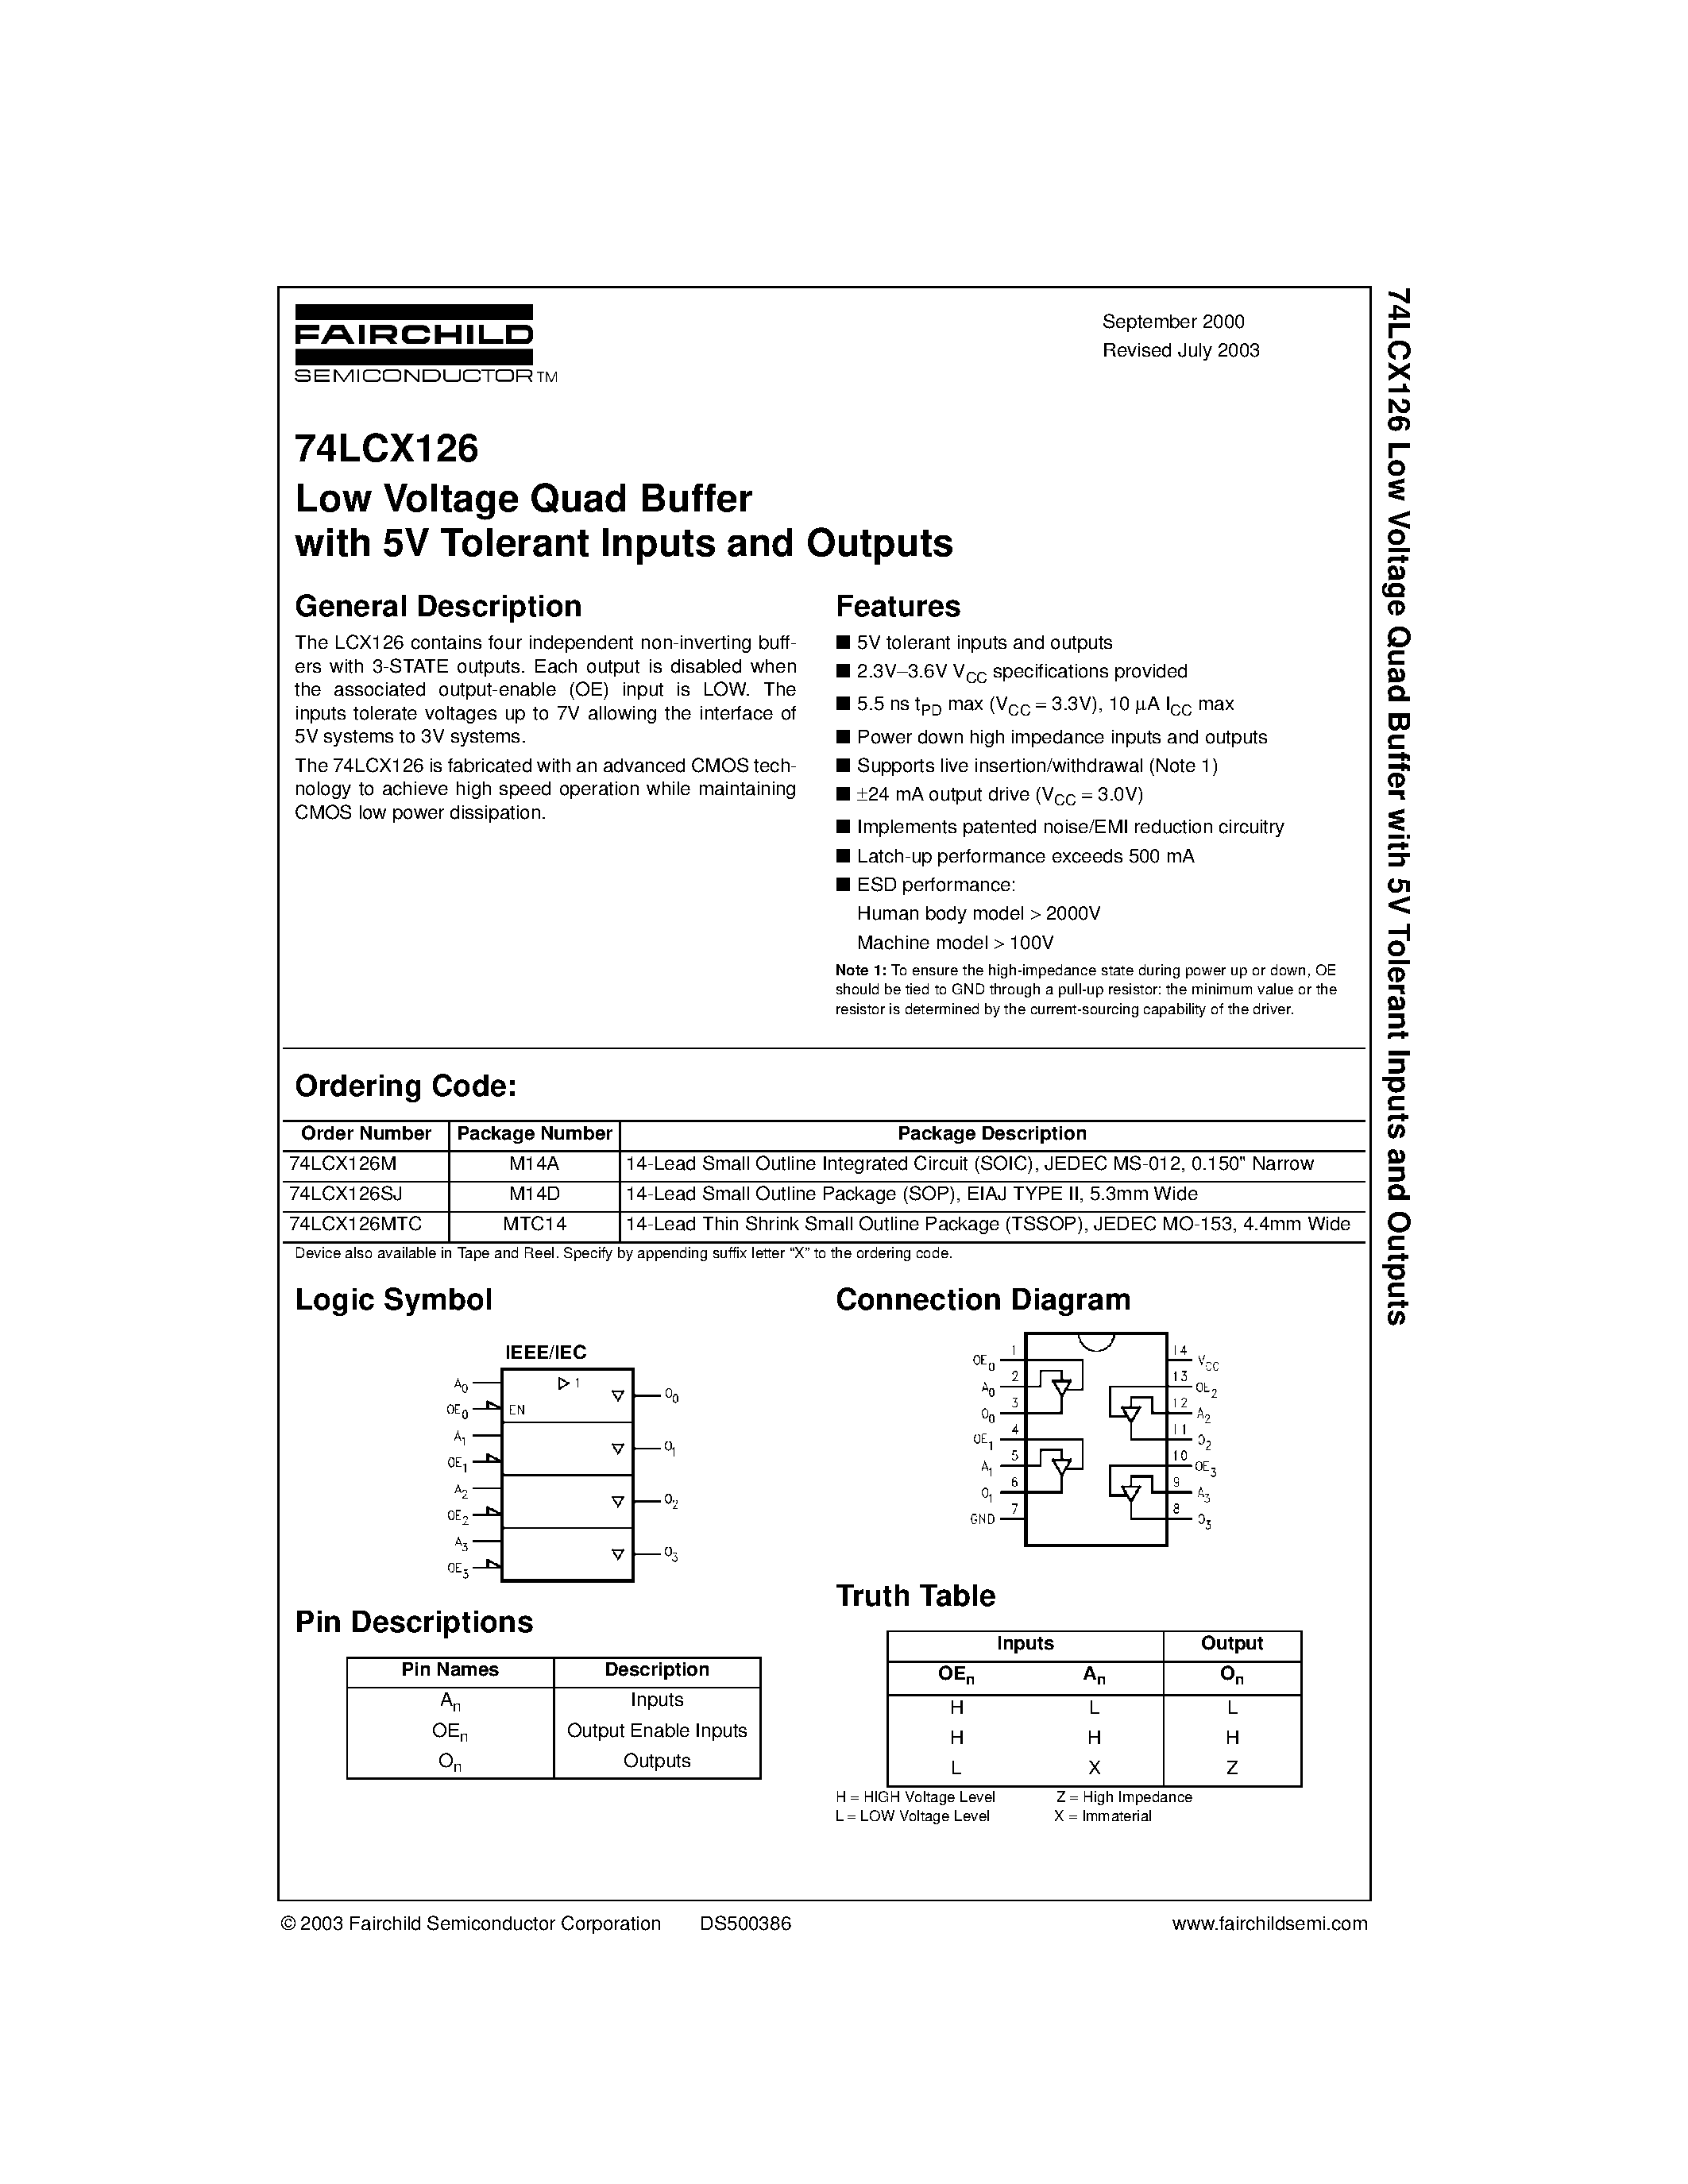 Datasheet 74LCX126M - Low Voltage Quad Buffer with 5V Tolerant Inputs and Outputs page 1